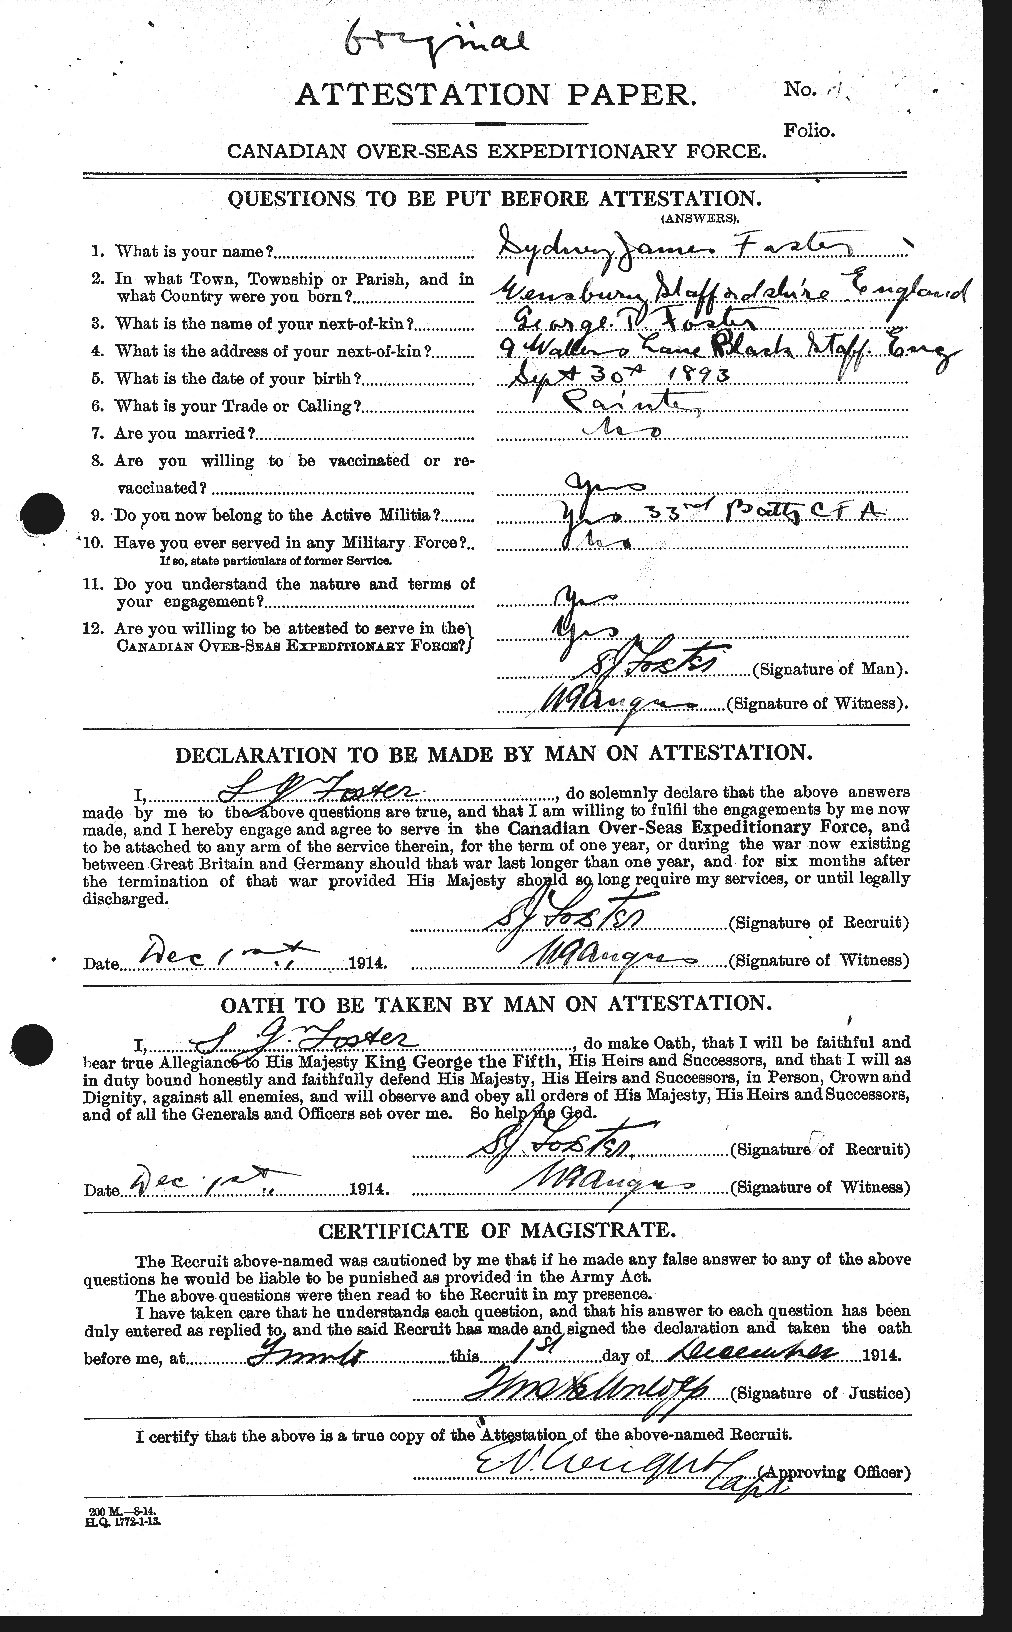 Personnel Records of the First World War - CEF 335219a